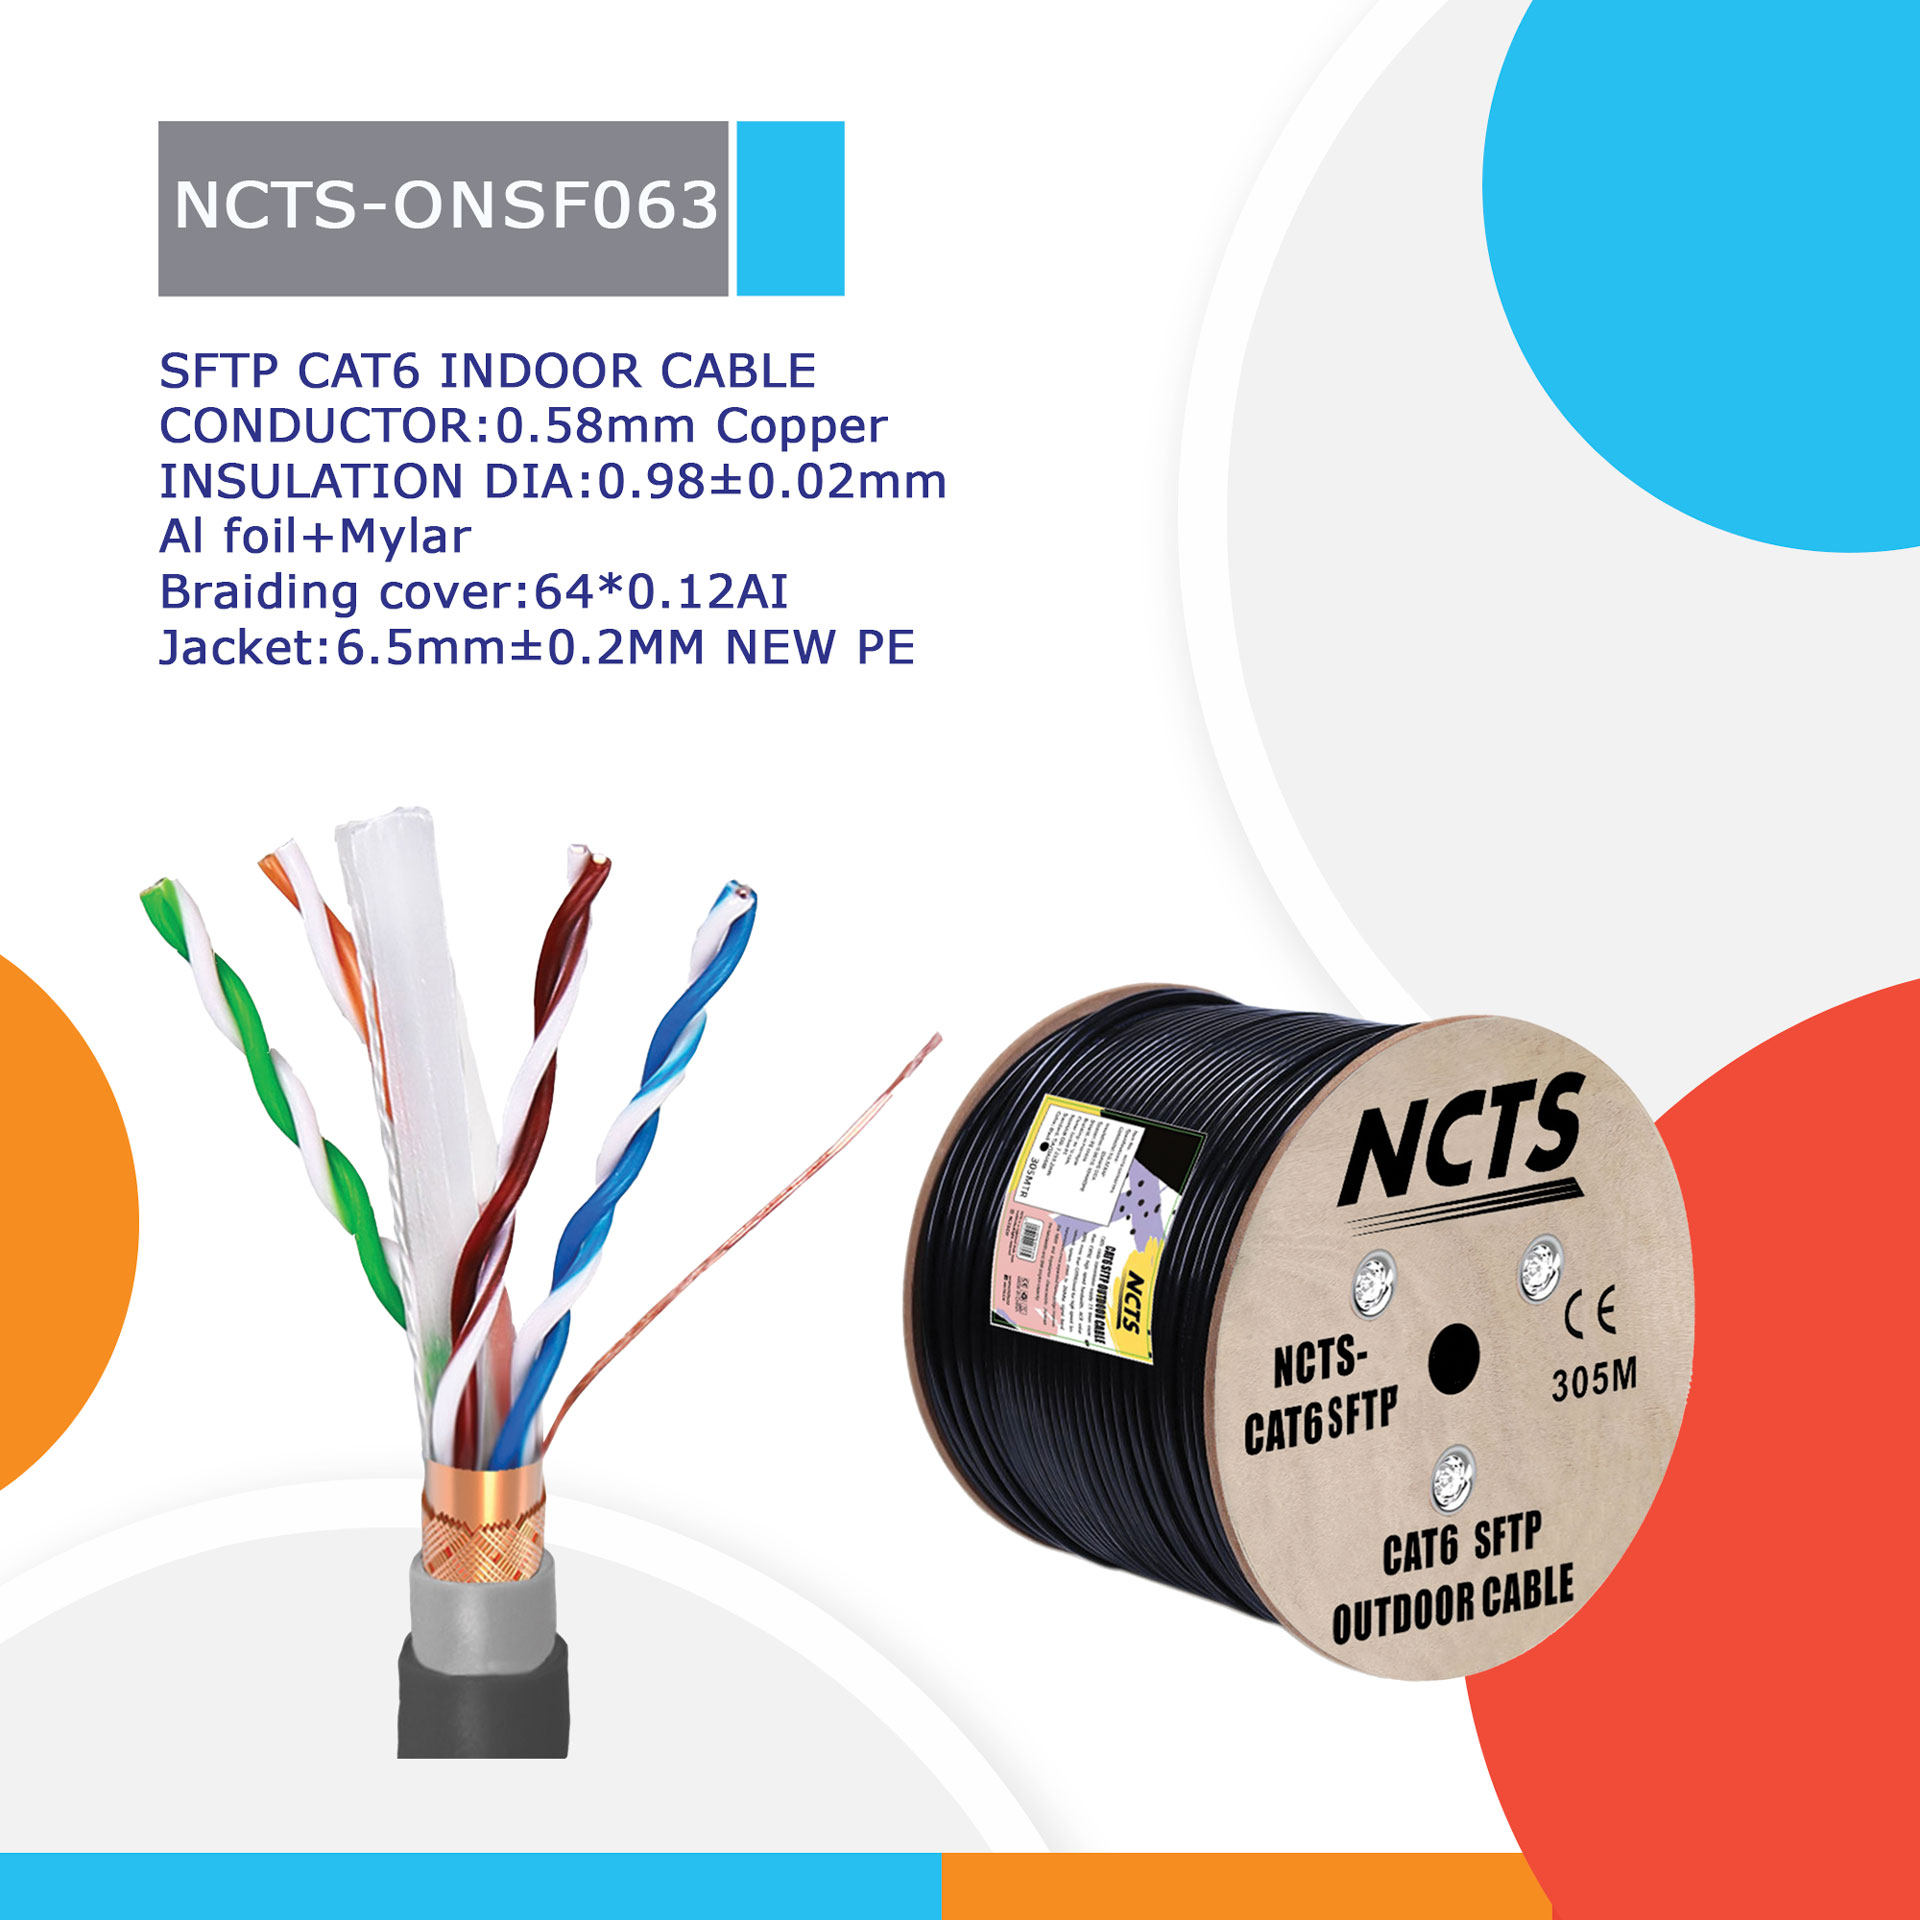 NCTS-ONSF063